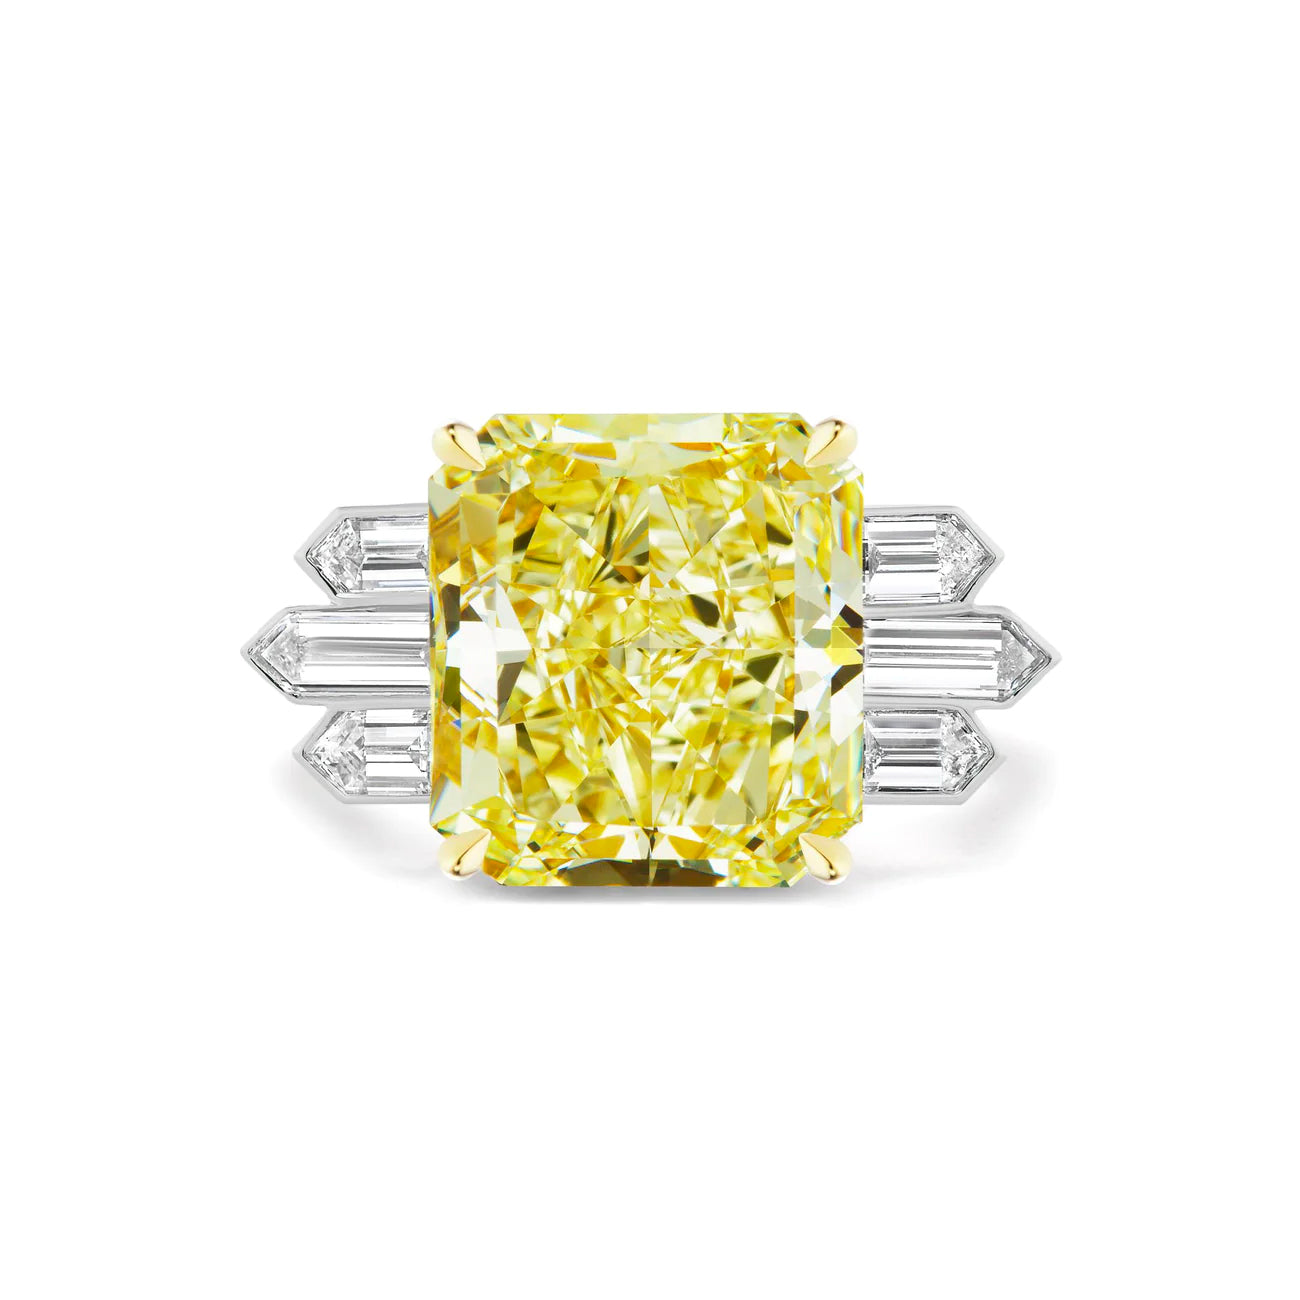 Fancy Yellow Radiant Cut Diamond with Bullet Baguettes